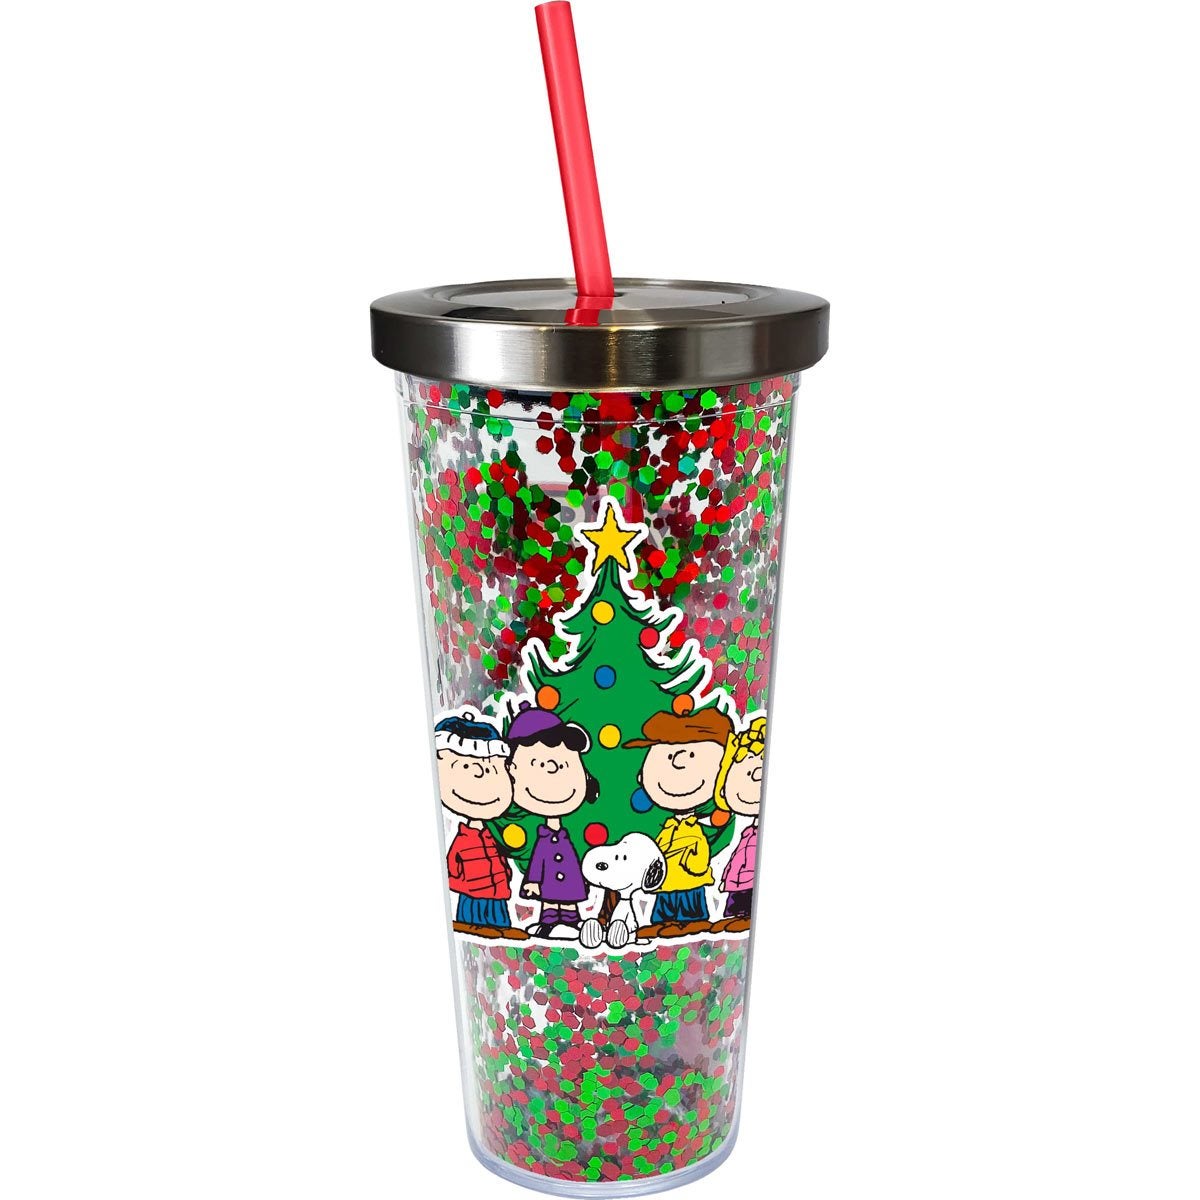 Baby Deals UK - Christmas Tumbler with straw at Home Bargains